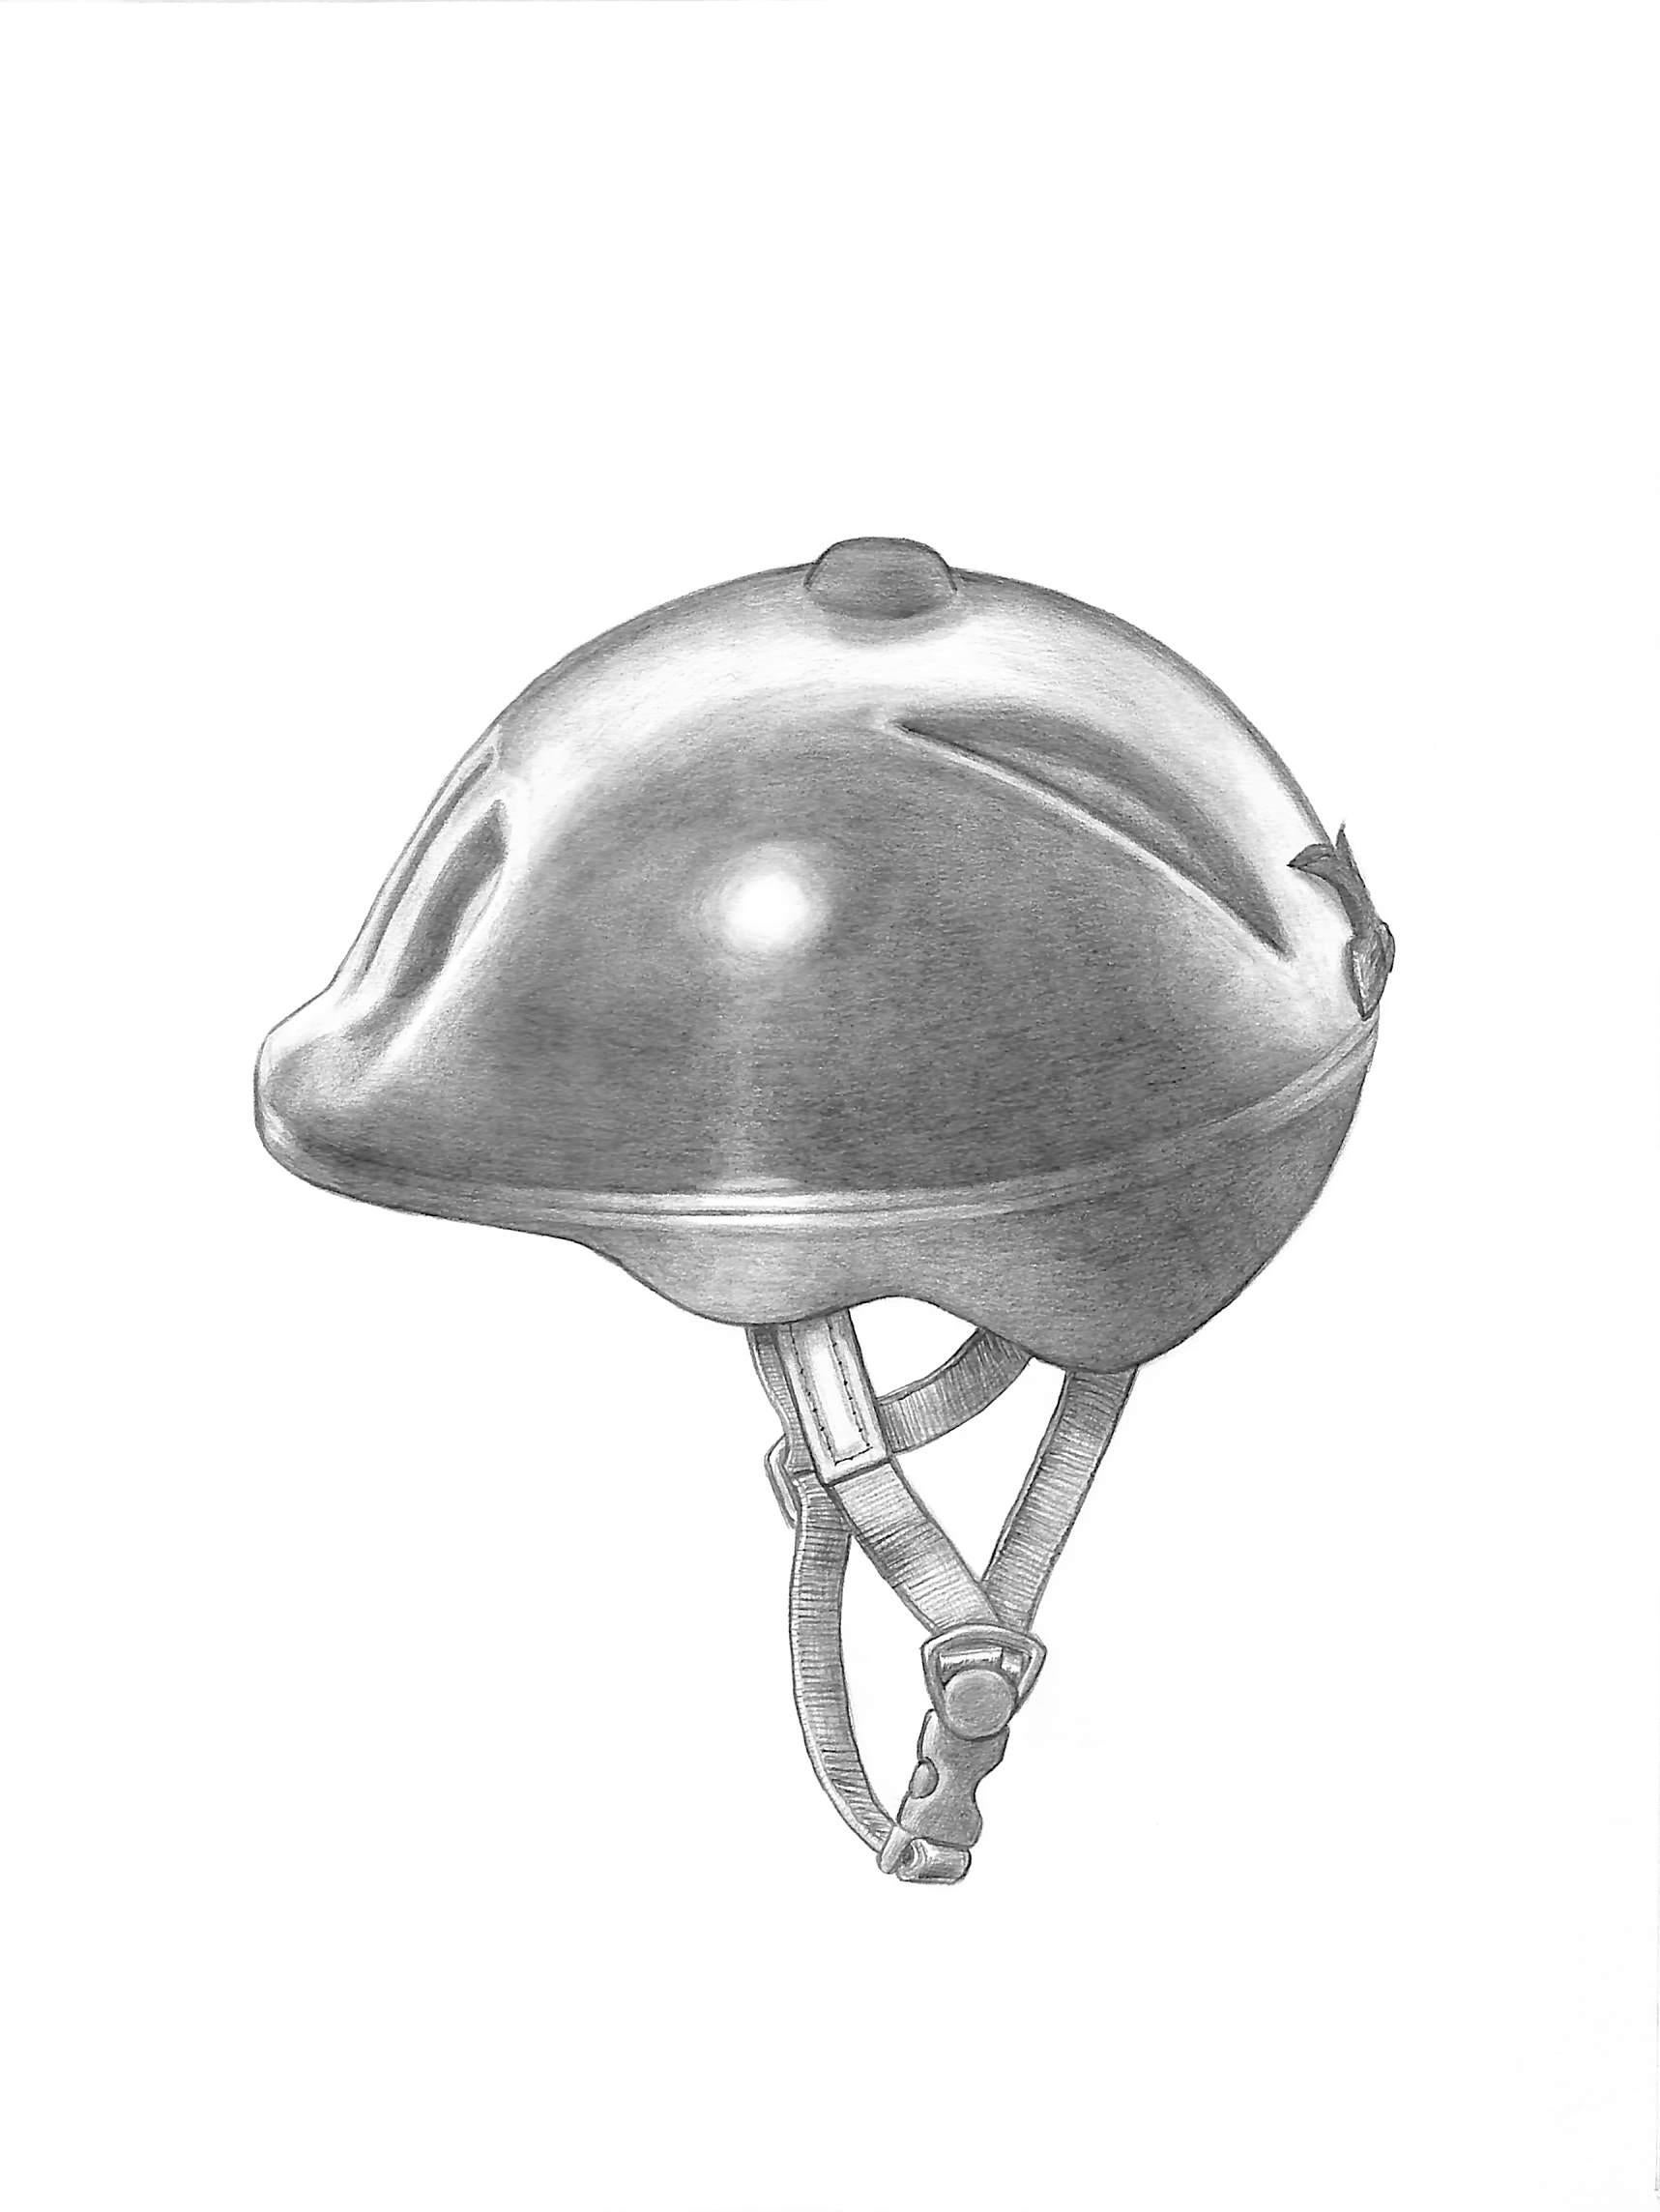 Milano Toddler Helmet Graphite Drawing - Art by Unknown